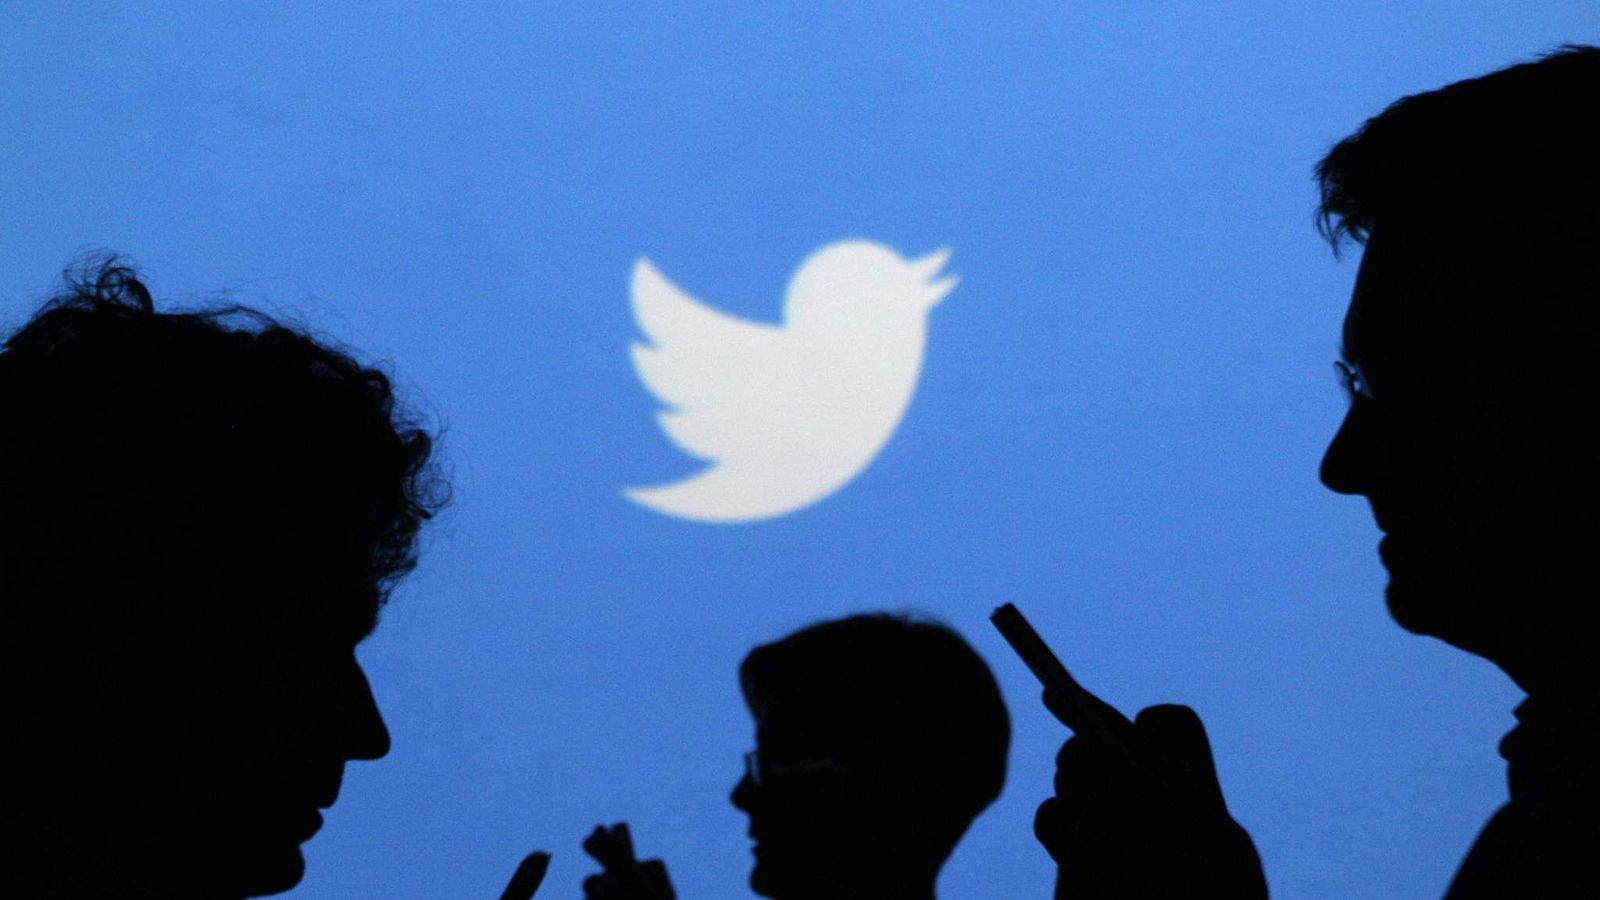 Twitter user numbers fall short as it reports $221m annual loss